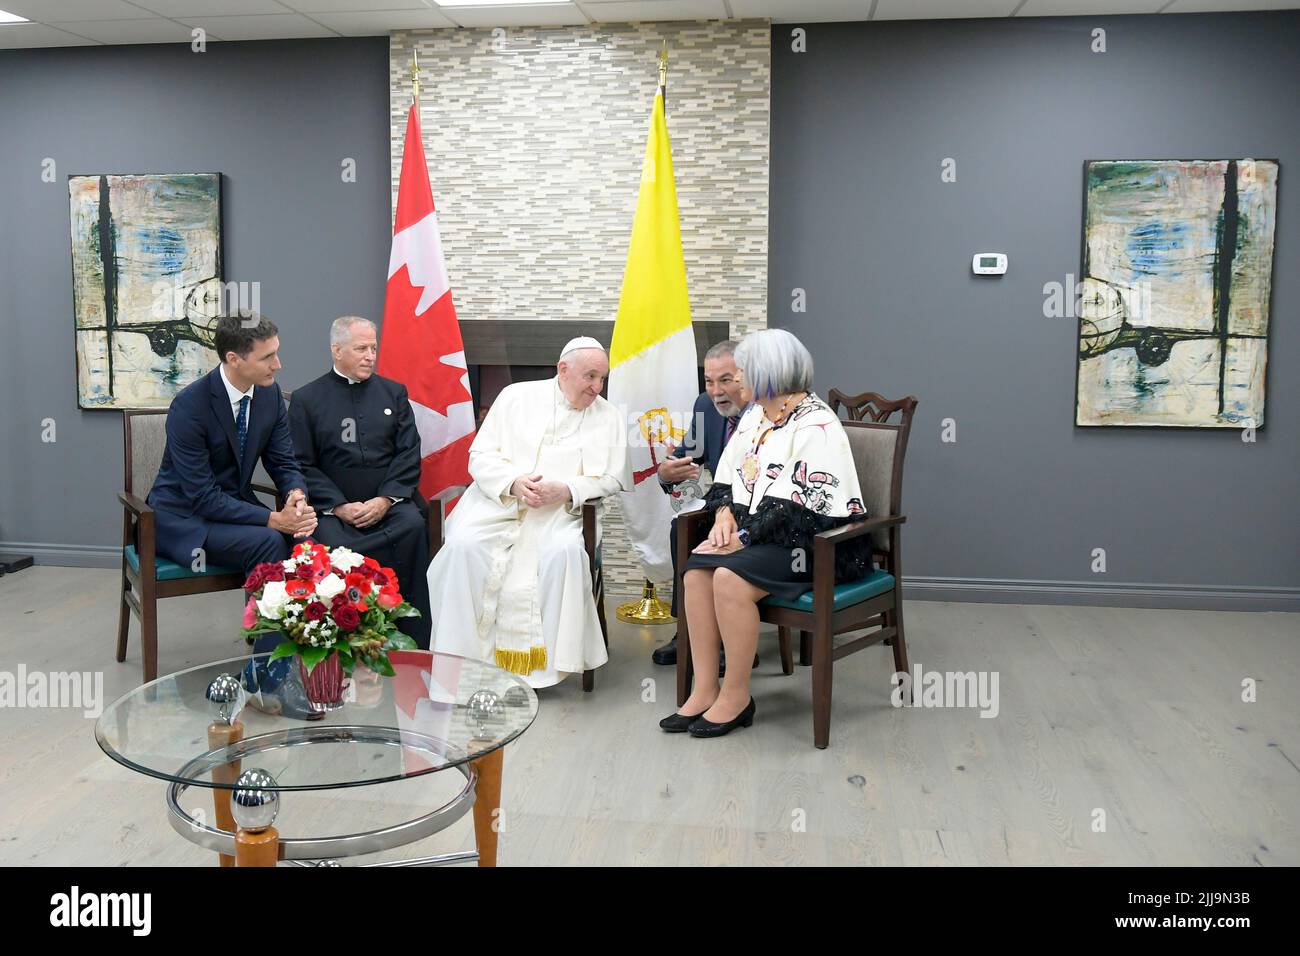 Vatican, Vatican. 24th July, 2022. Canada, Alberta, 2022/07/24 Pope Francis (C) and Canadian Prime Minister Justin Trudeau (L) meets members of an indigenous tribe during his welcoming ceremony at Edmonton International Airport in Alberta, western Canada Photograph by Vatican Mediia/Catholic Press Photo/Hans Lucas. RESTRICTED TO EDITORIAL USE - NO MARKETING - NO ADVERTISING CAMPAIGNS. Credit: Independent Photo Agency/Alamy Live News Stock Photo